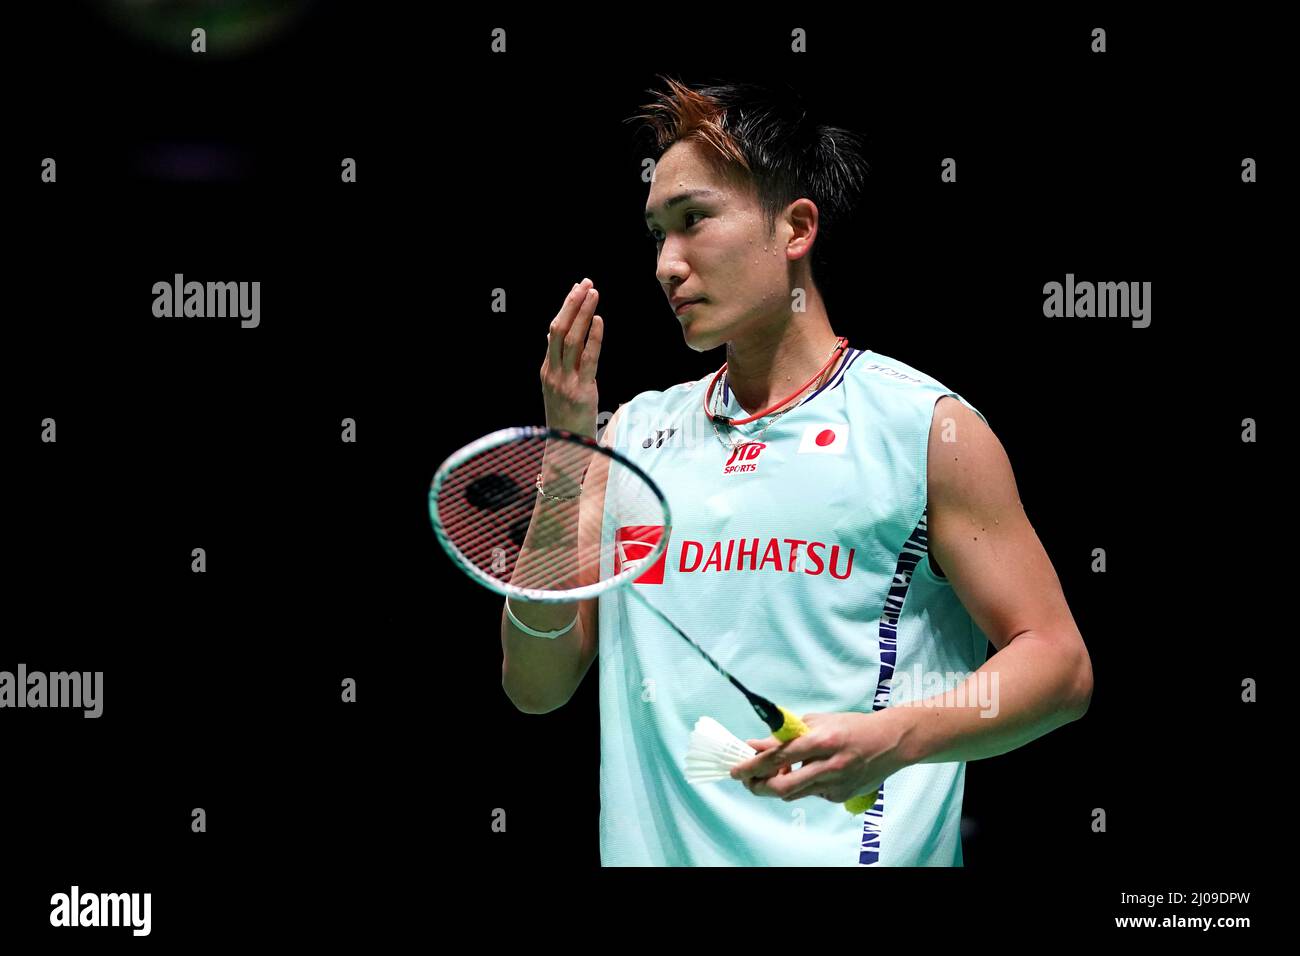 Japans Kento Momota in action against Koreas Heo Kwanohee during day two of the YONEX All England Open Badminton Championships at the Utilita Arena Birmingham